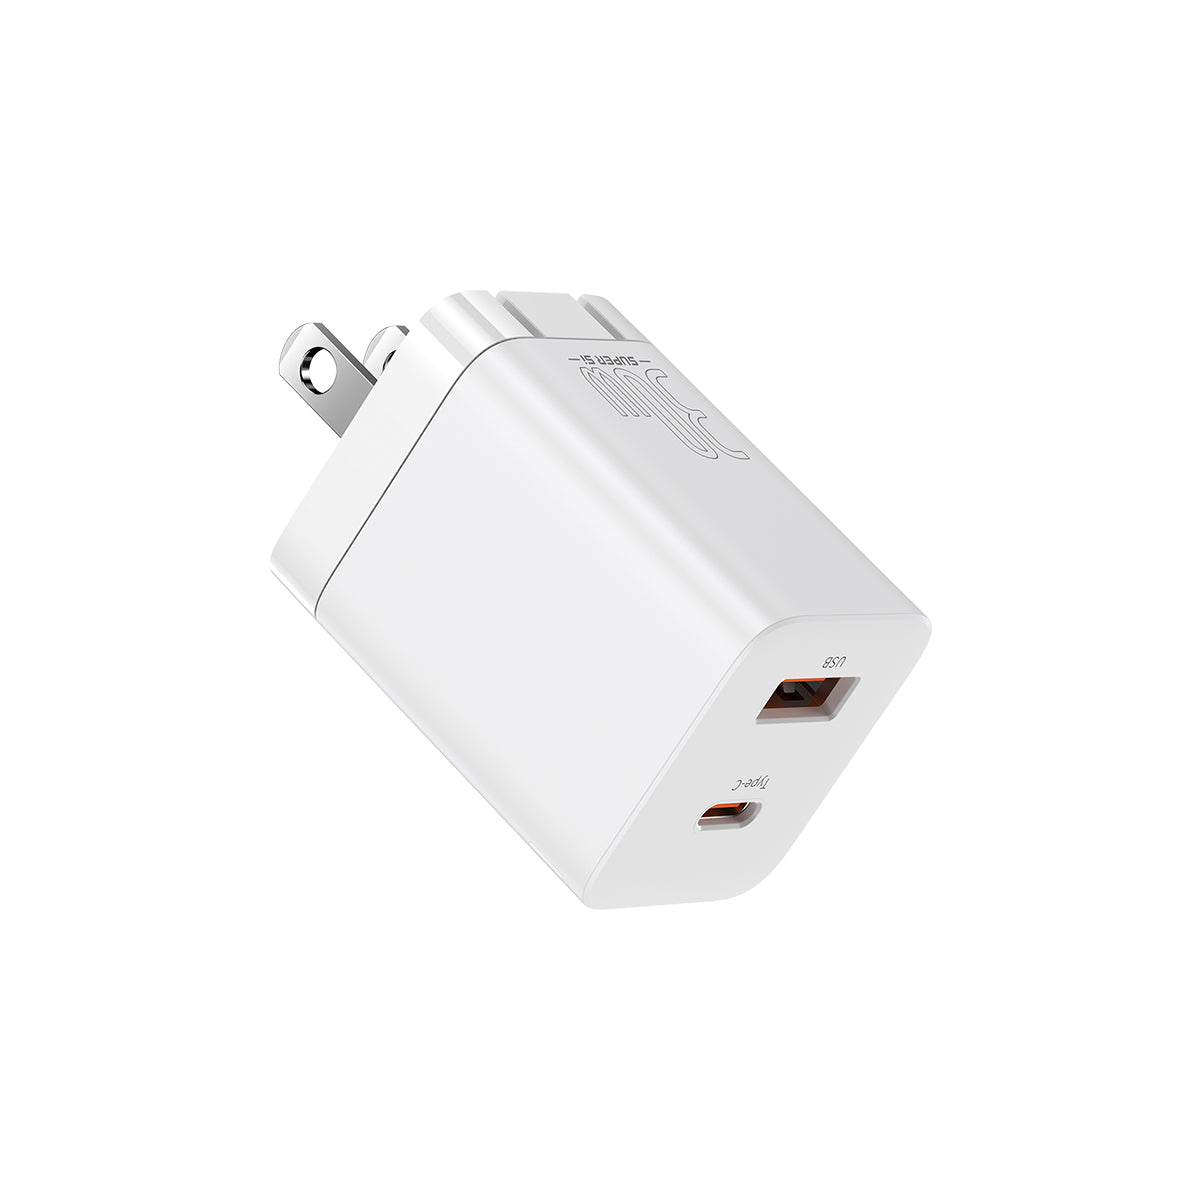 baseus_super_si_pro_dual_port_fast_charger_30w_with_usb_a_usb_c_ports